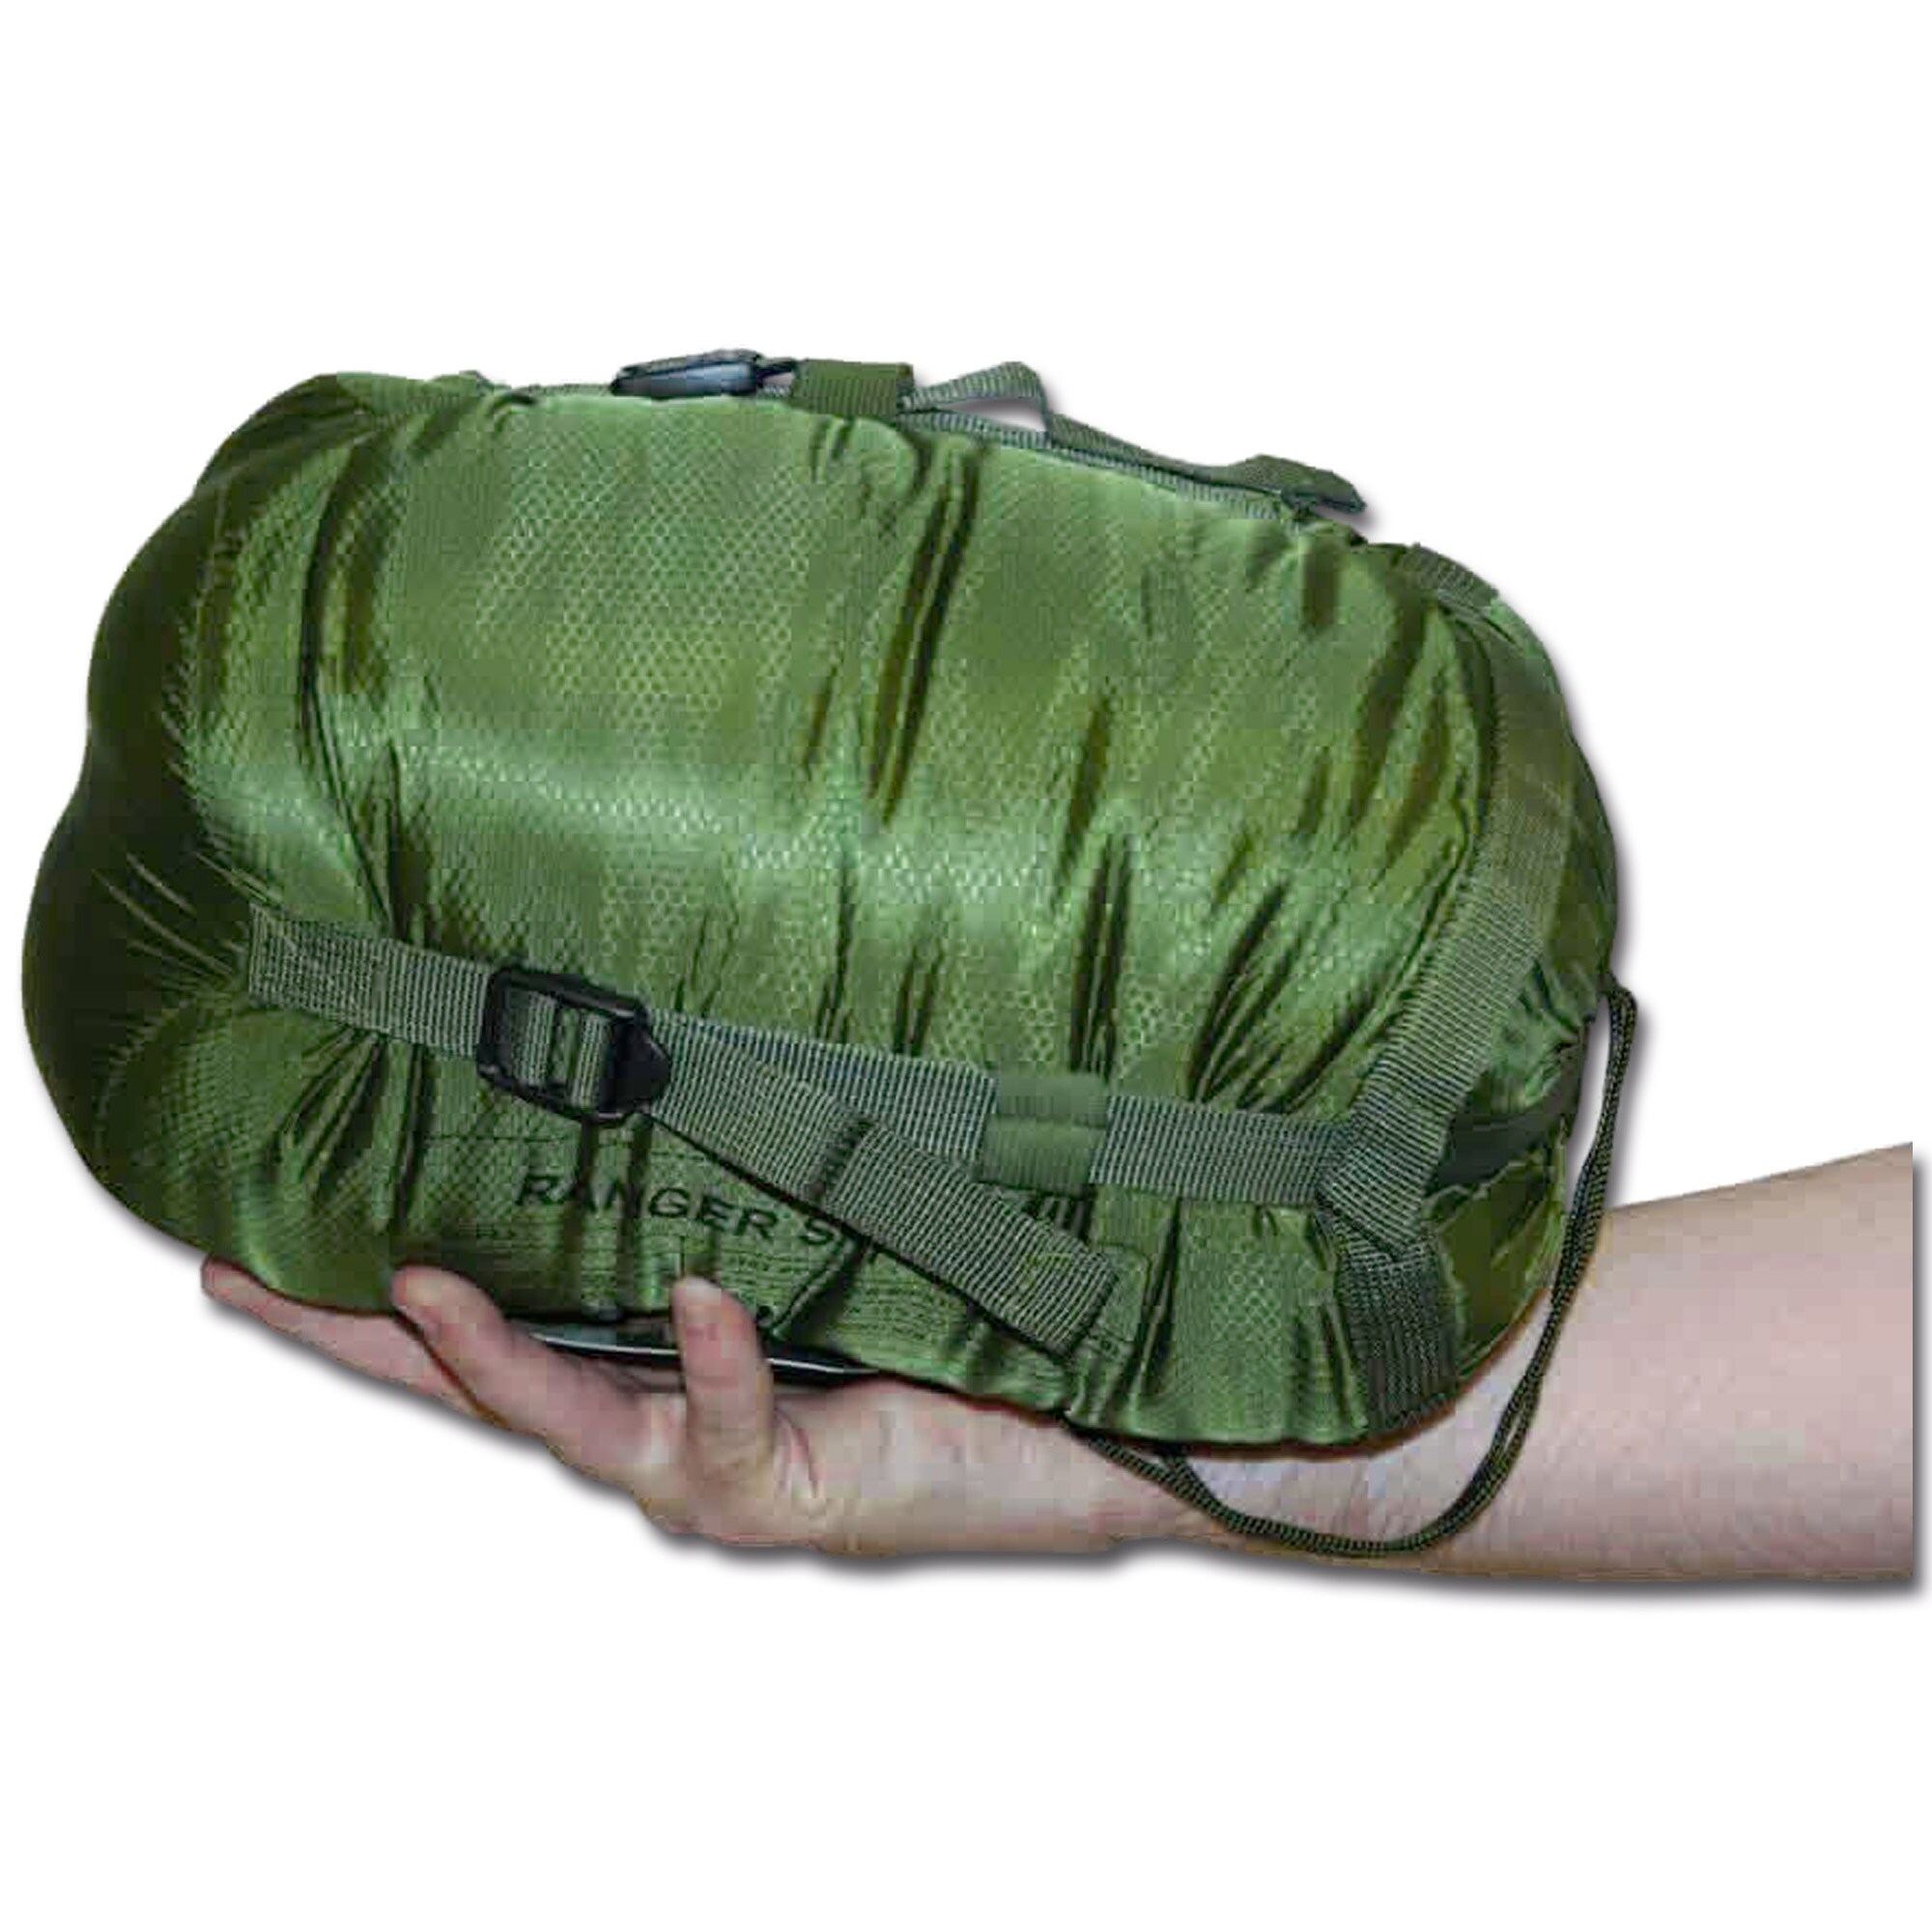 Highlander Challenger Lite 100 Olive Green Military Sleeping Tactical Camping